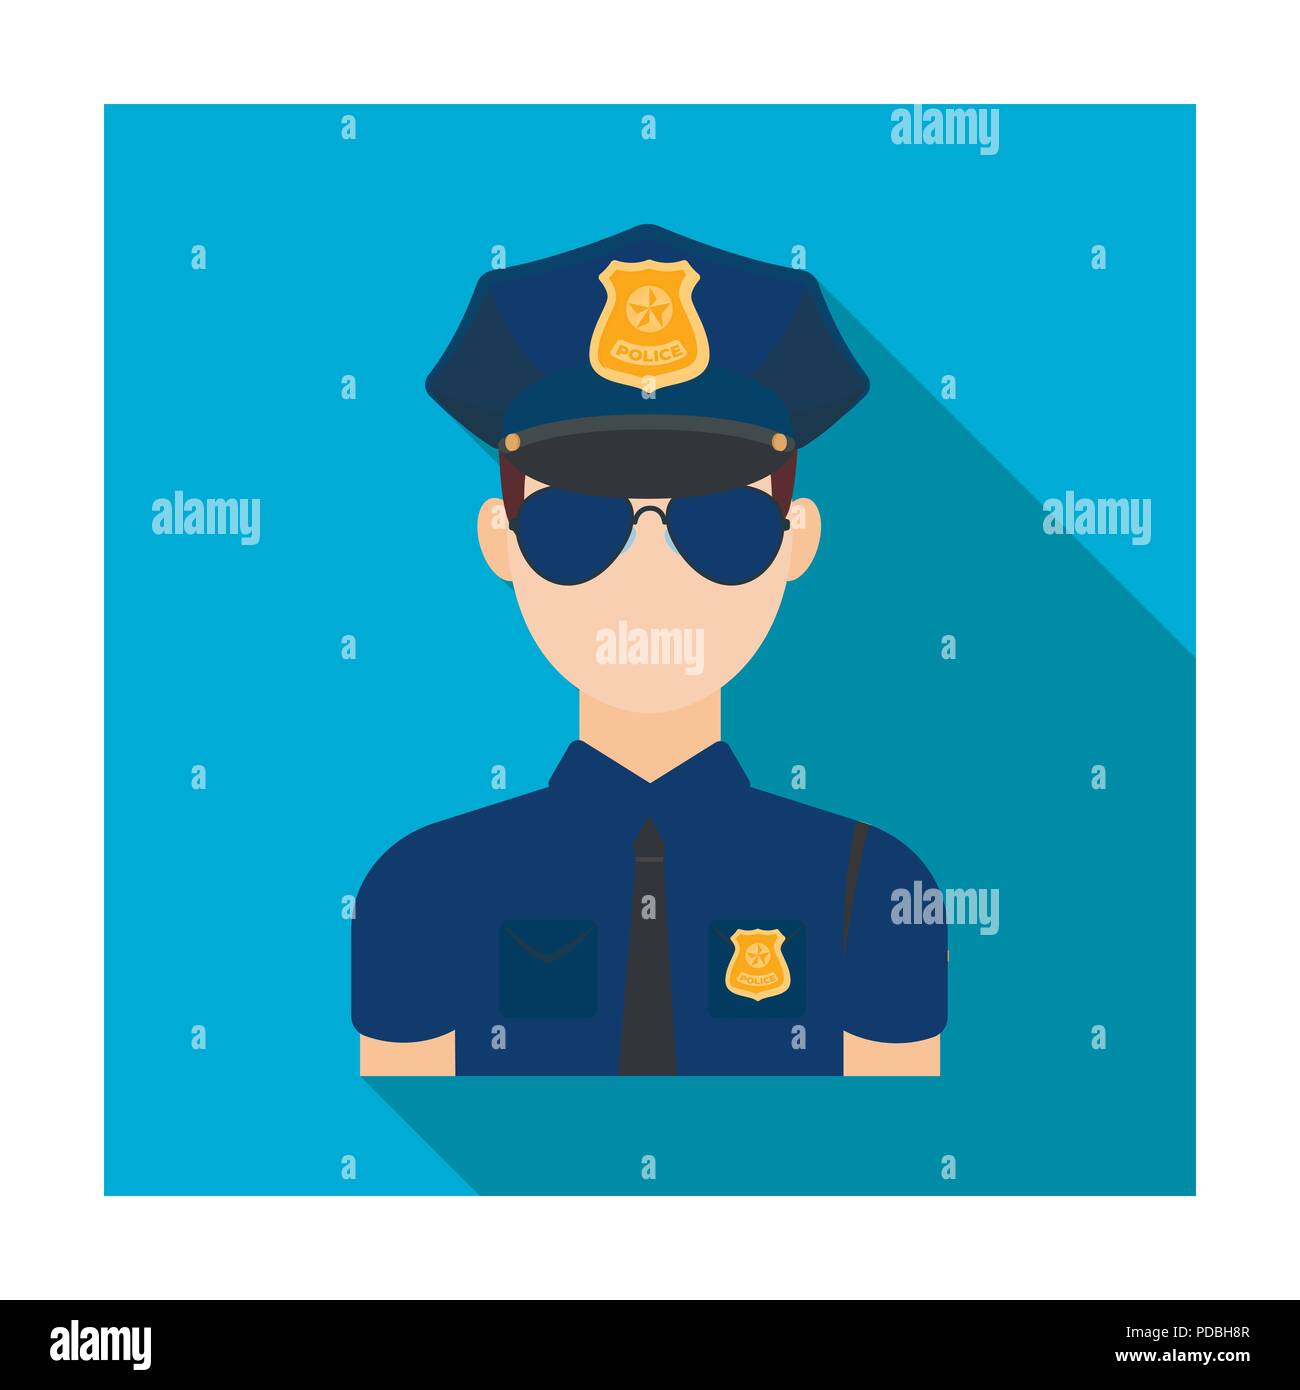 Police officer icon in flat design isolated on white background. Police symbol stock vector illustration. Stock Vector